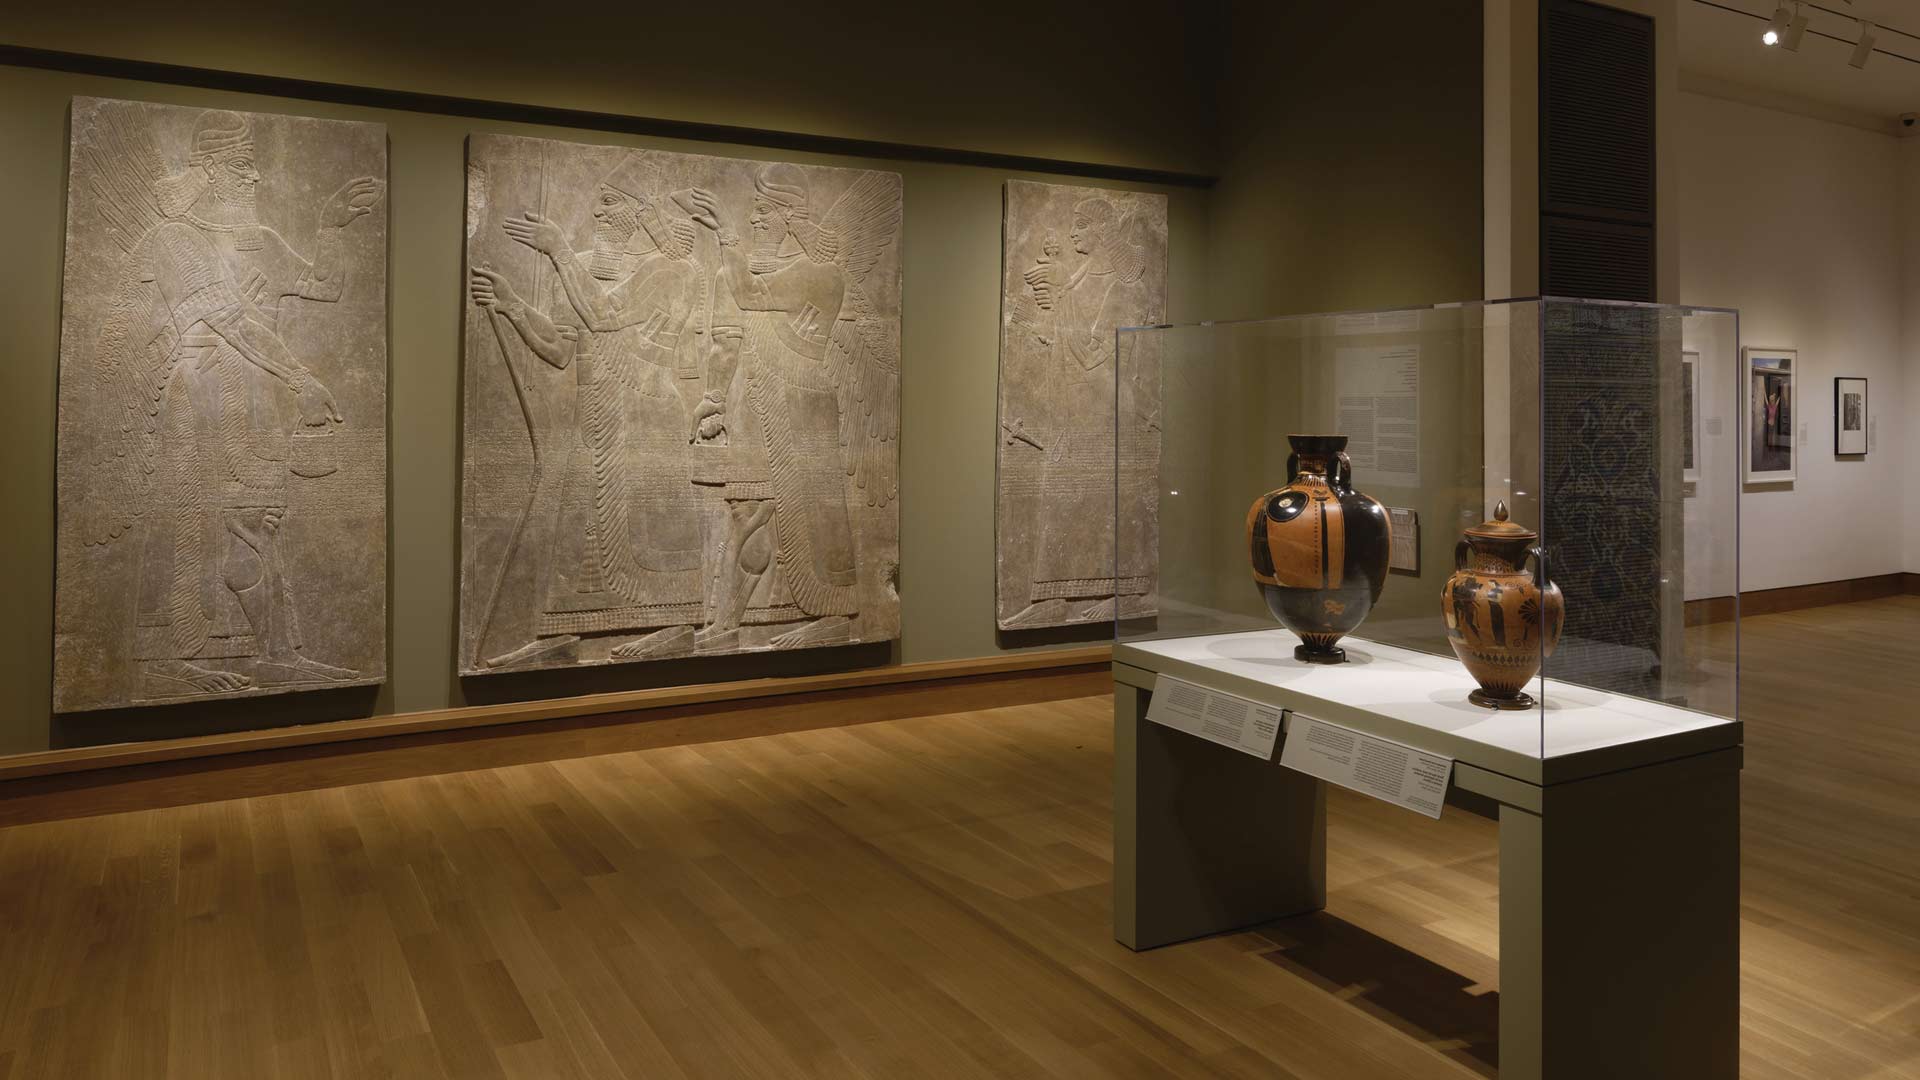 Global Cultures: Ancient and Premodern on view at the Hood Museum of Art, Dartmouth. Photo by Jeffrey Nintzel.